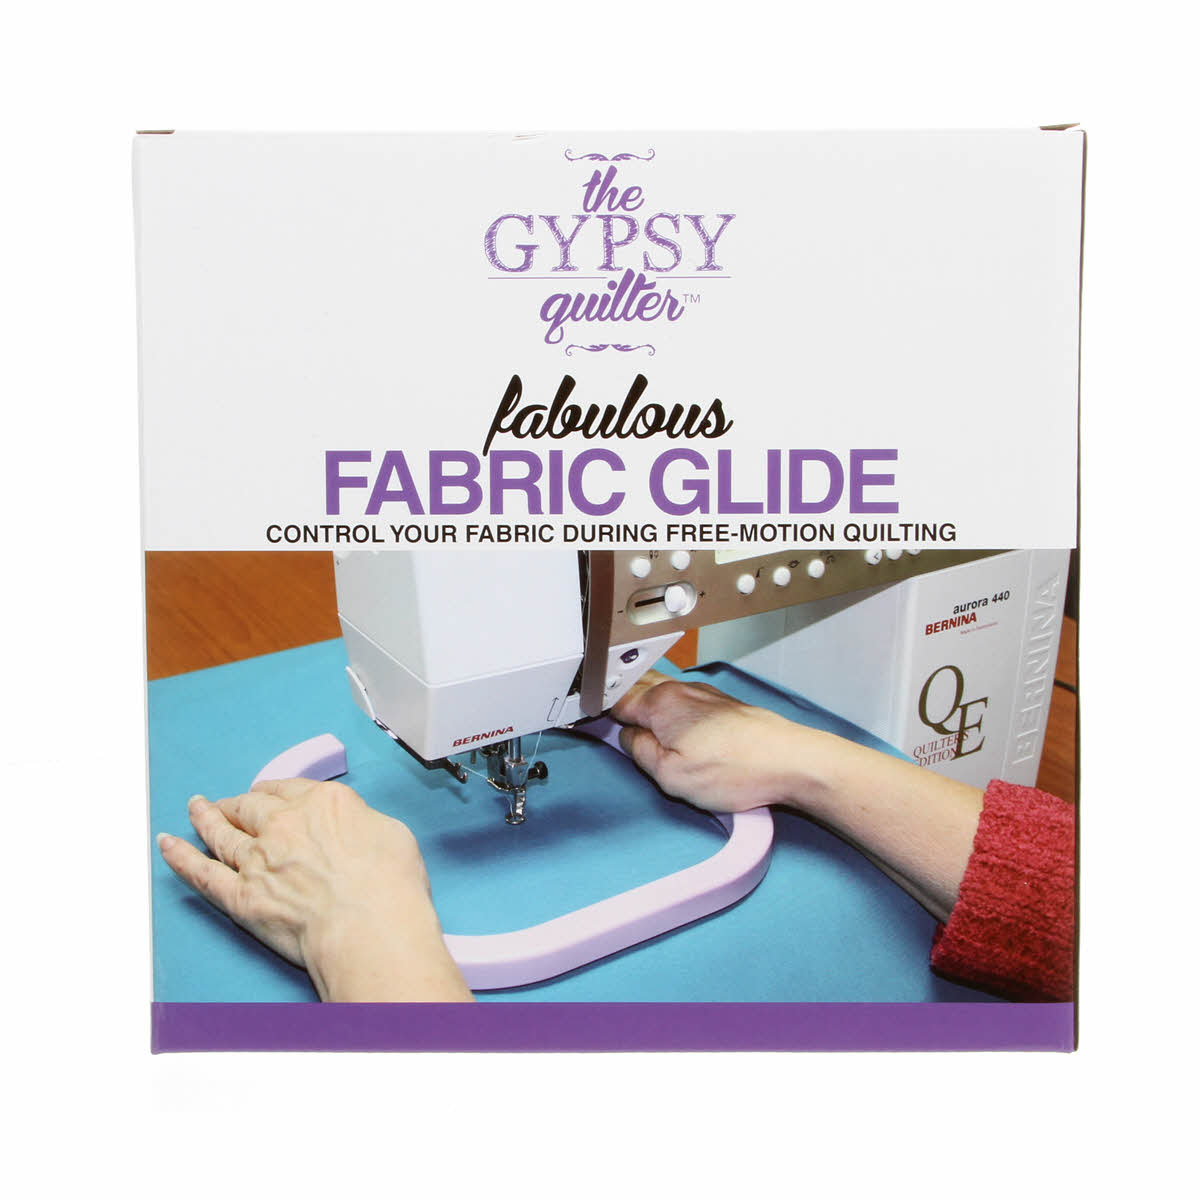 The Gypsy Quilter Fabric Glide